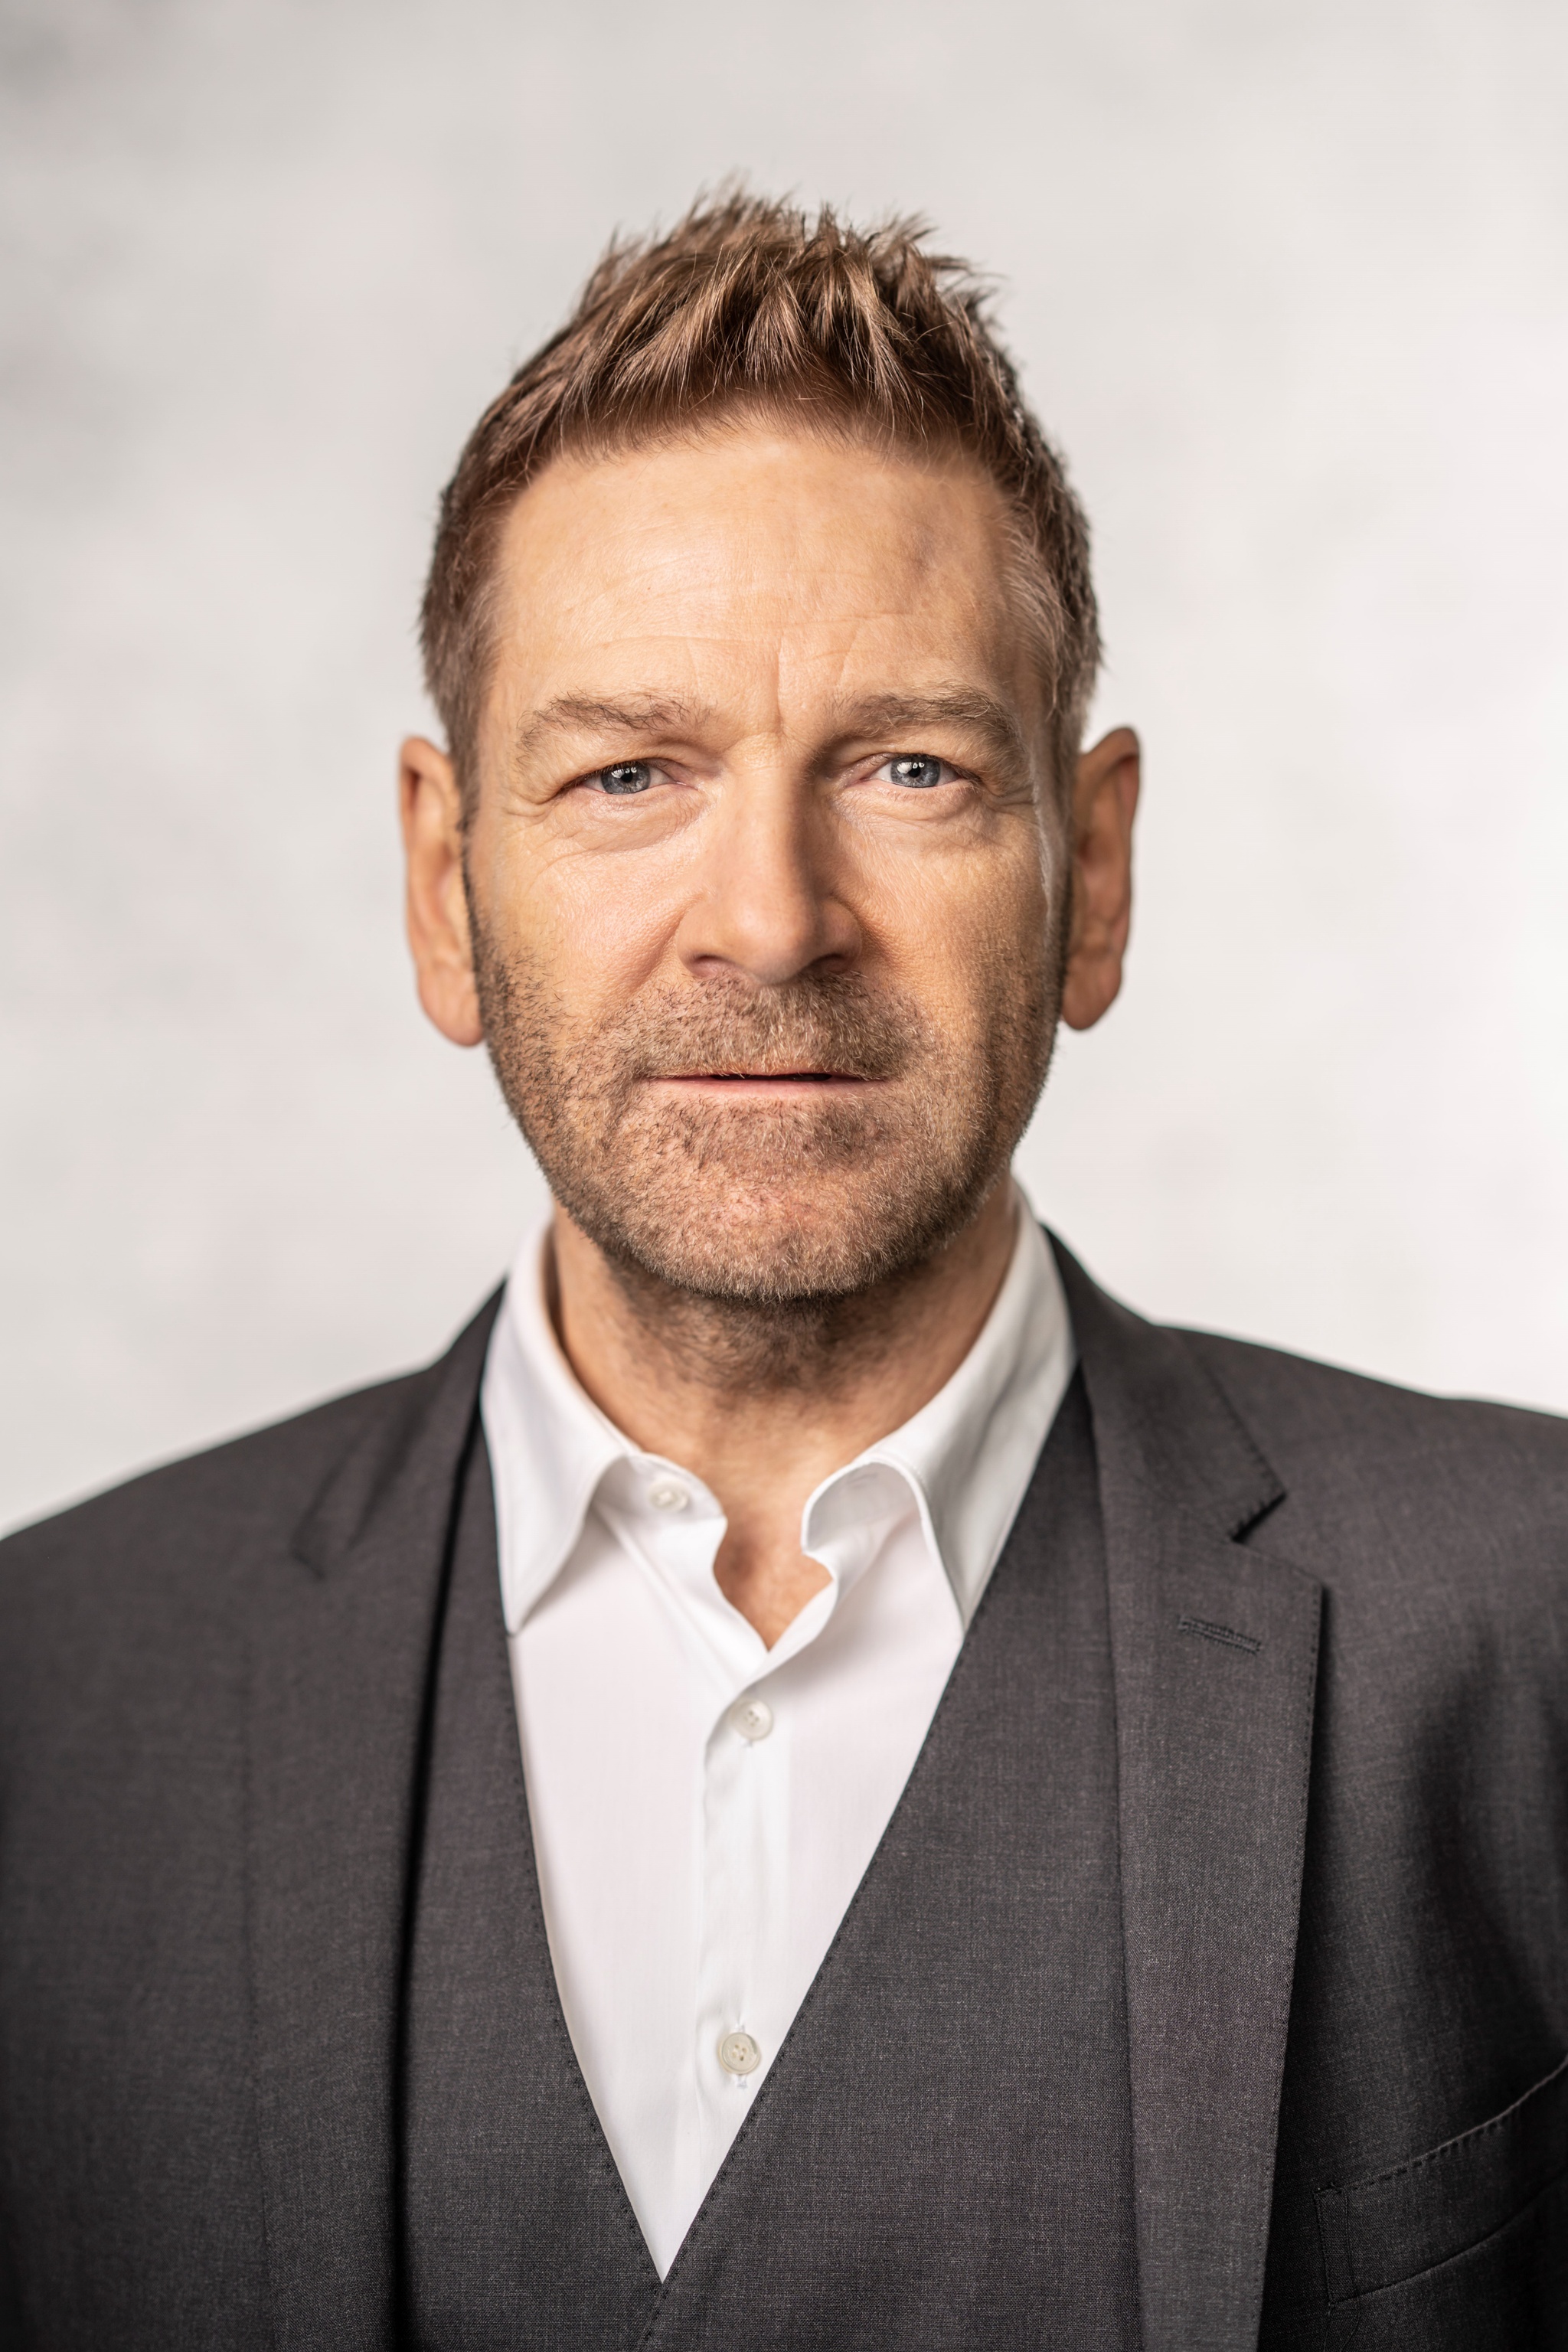 A headshot of actor Kenneth Branagh, a white man with light brown hair. Kenneth looks directly at us and wears a three piece suit, without a tie. 